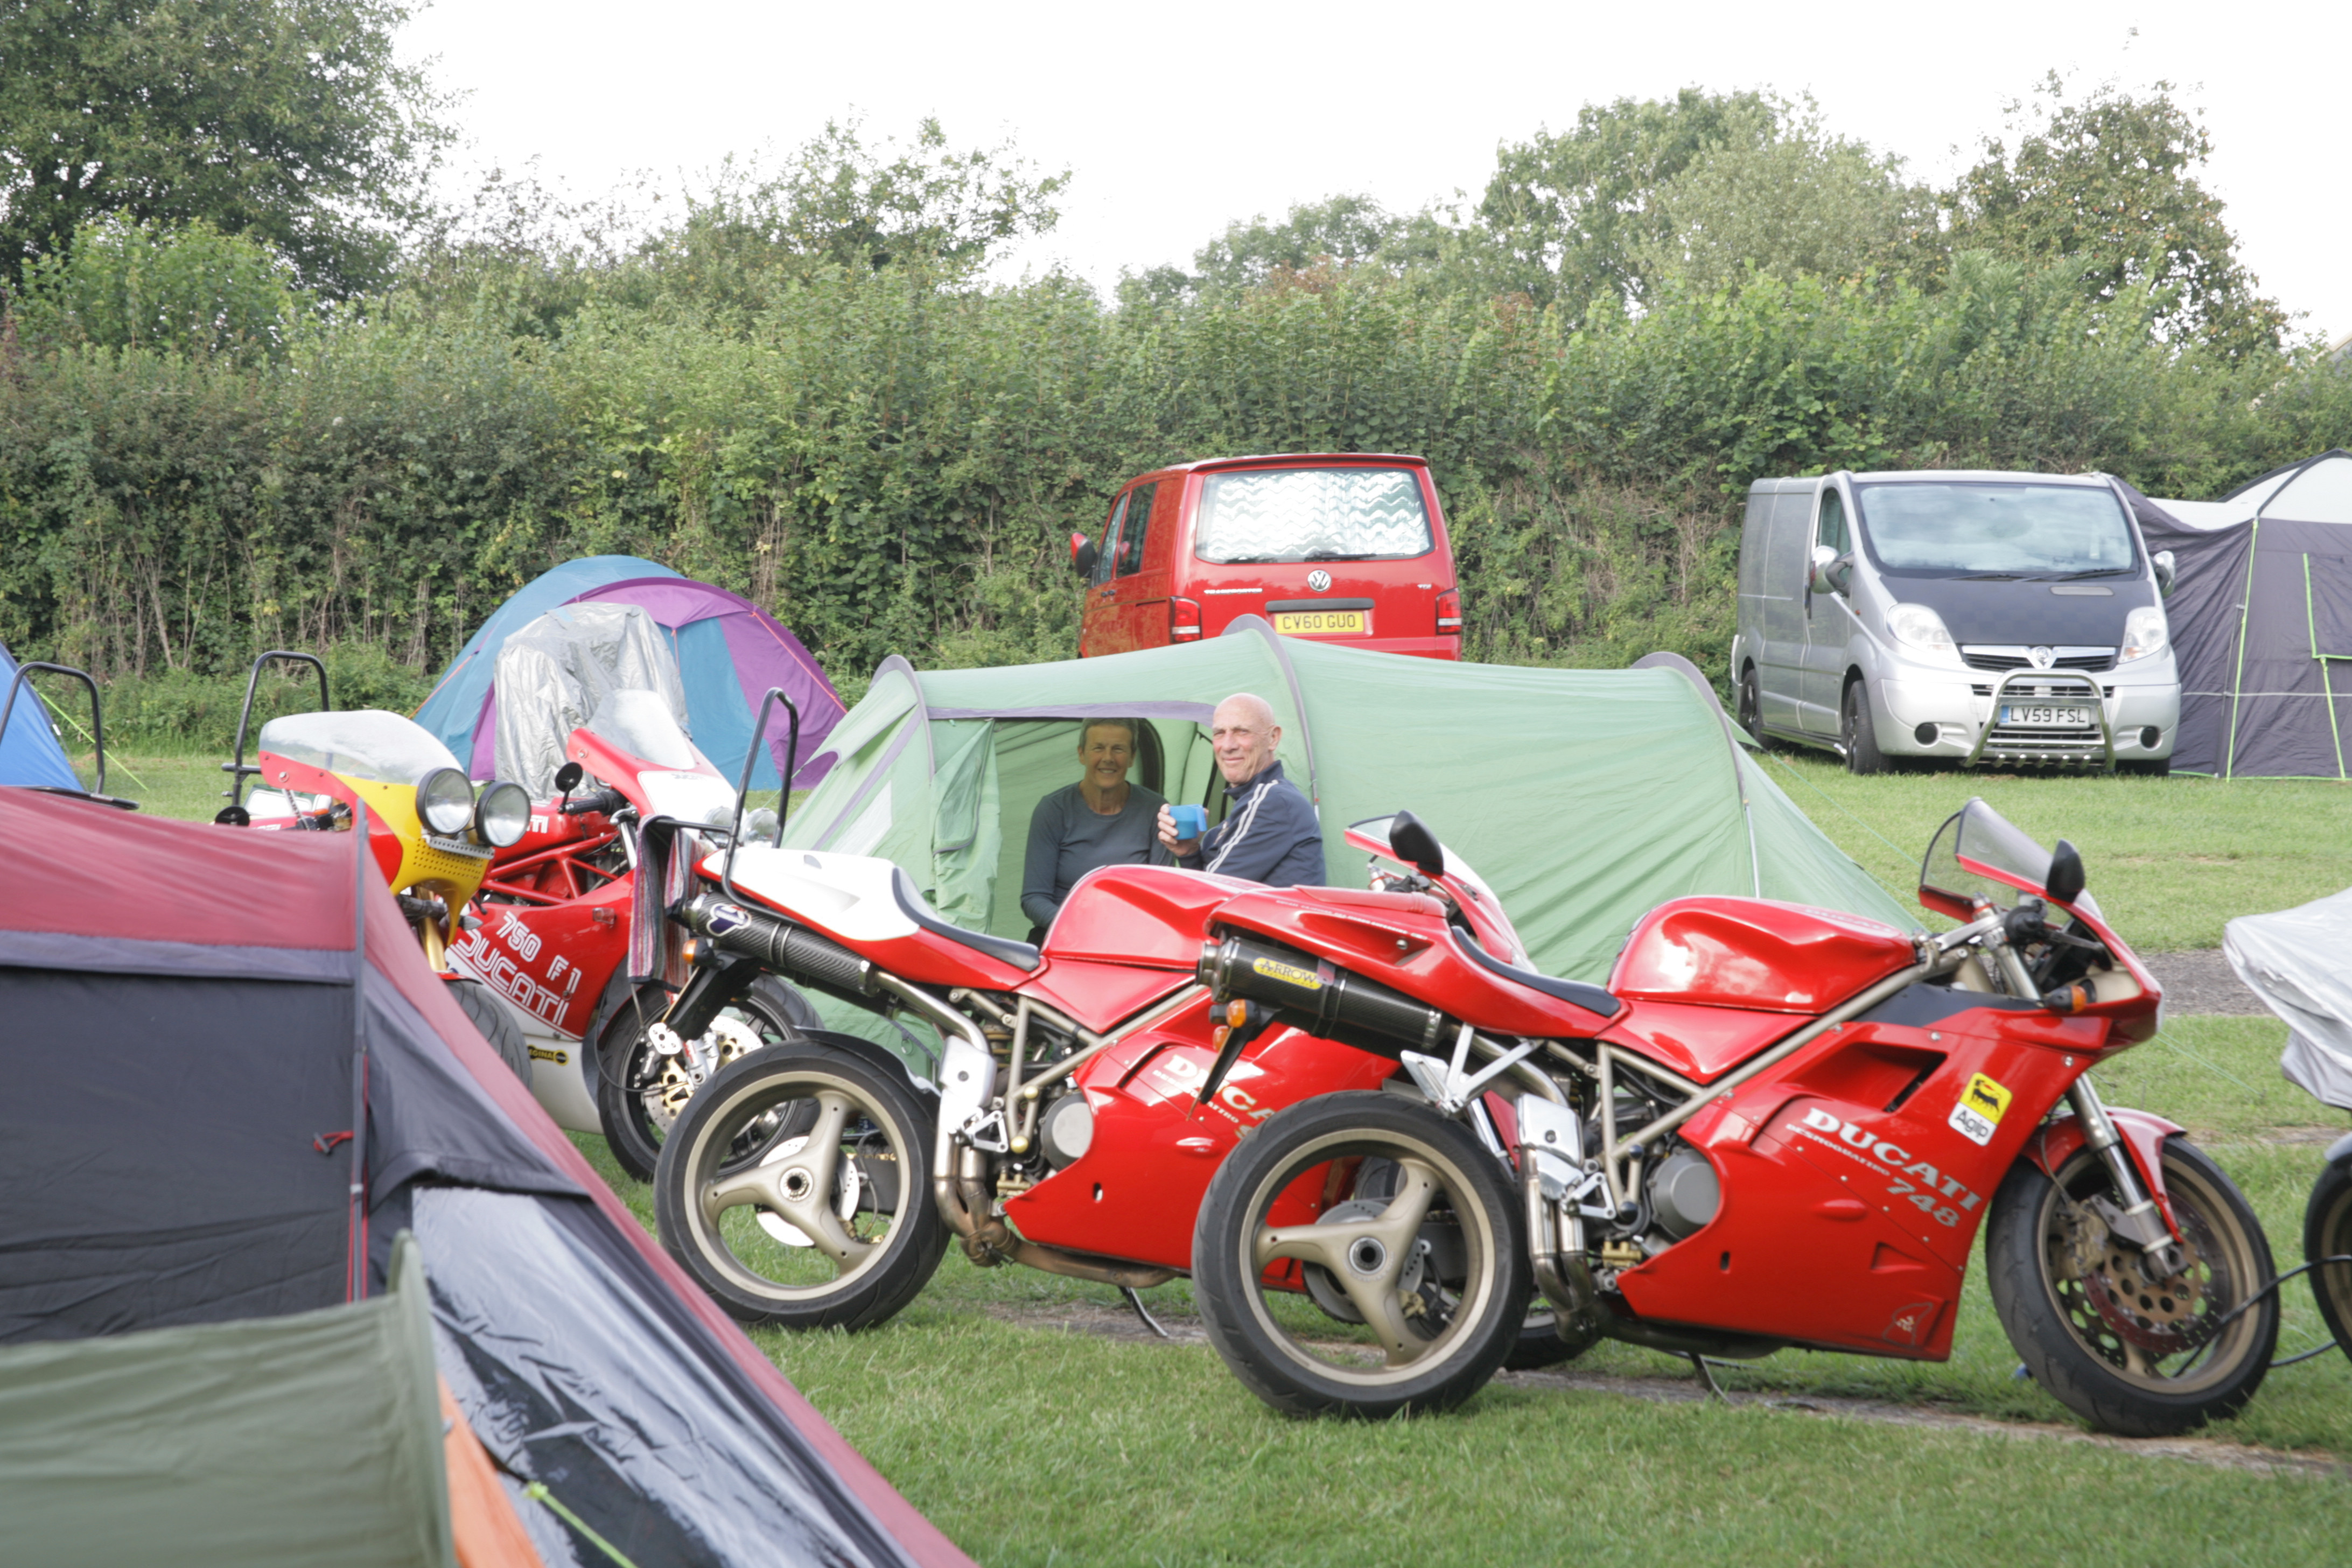 Good morning campers. Castle Combe Southern